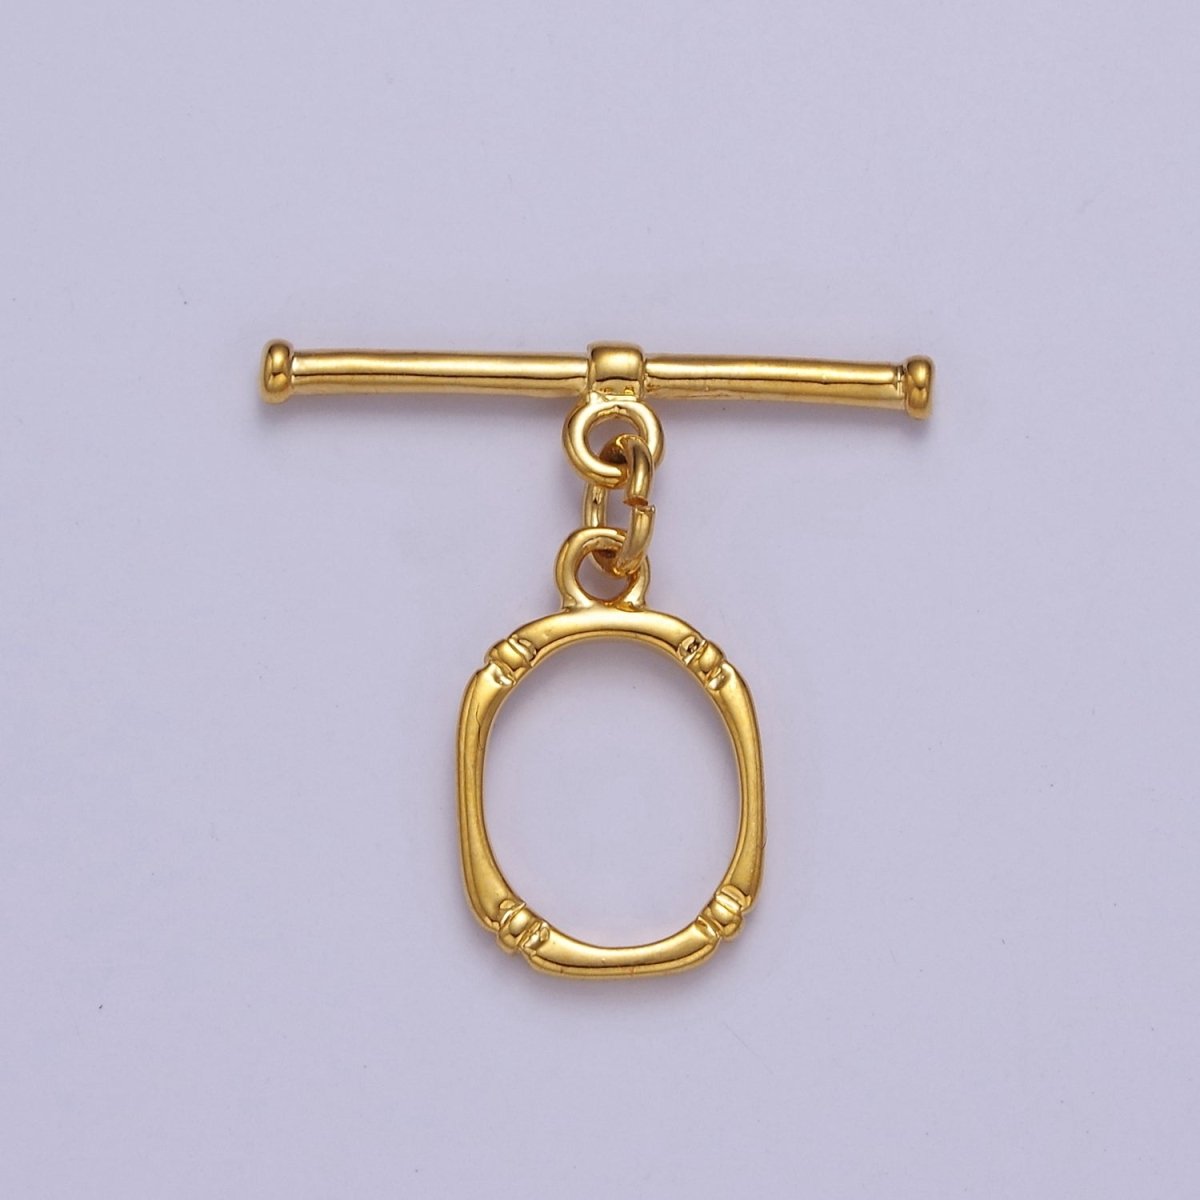 24k Gold Filled Round Oval Clasp, Jewelry Clasp OT Clasp Findings L-684 L-685 L-686 - DLUXCA